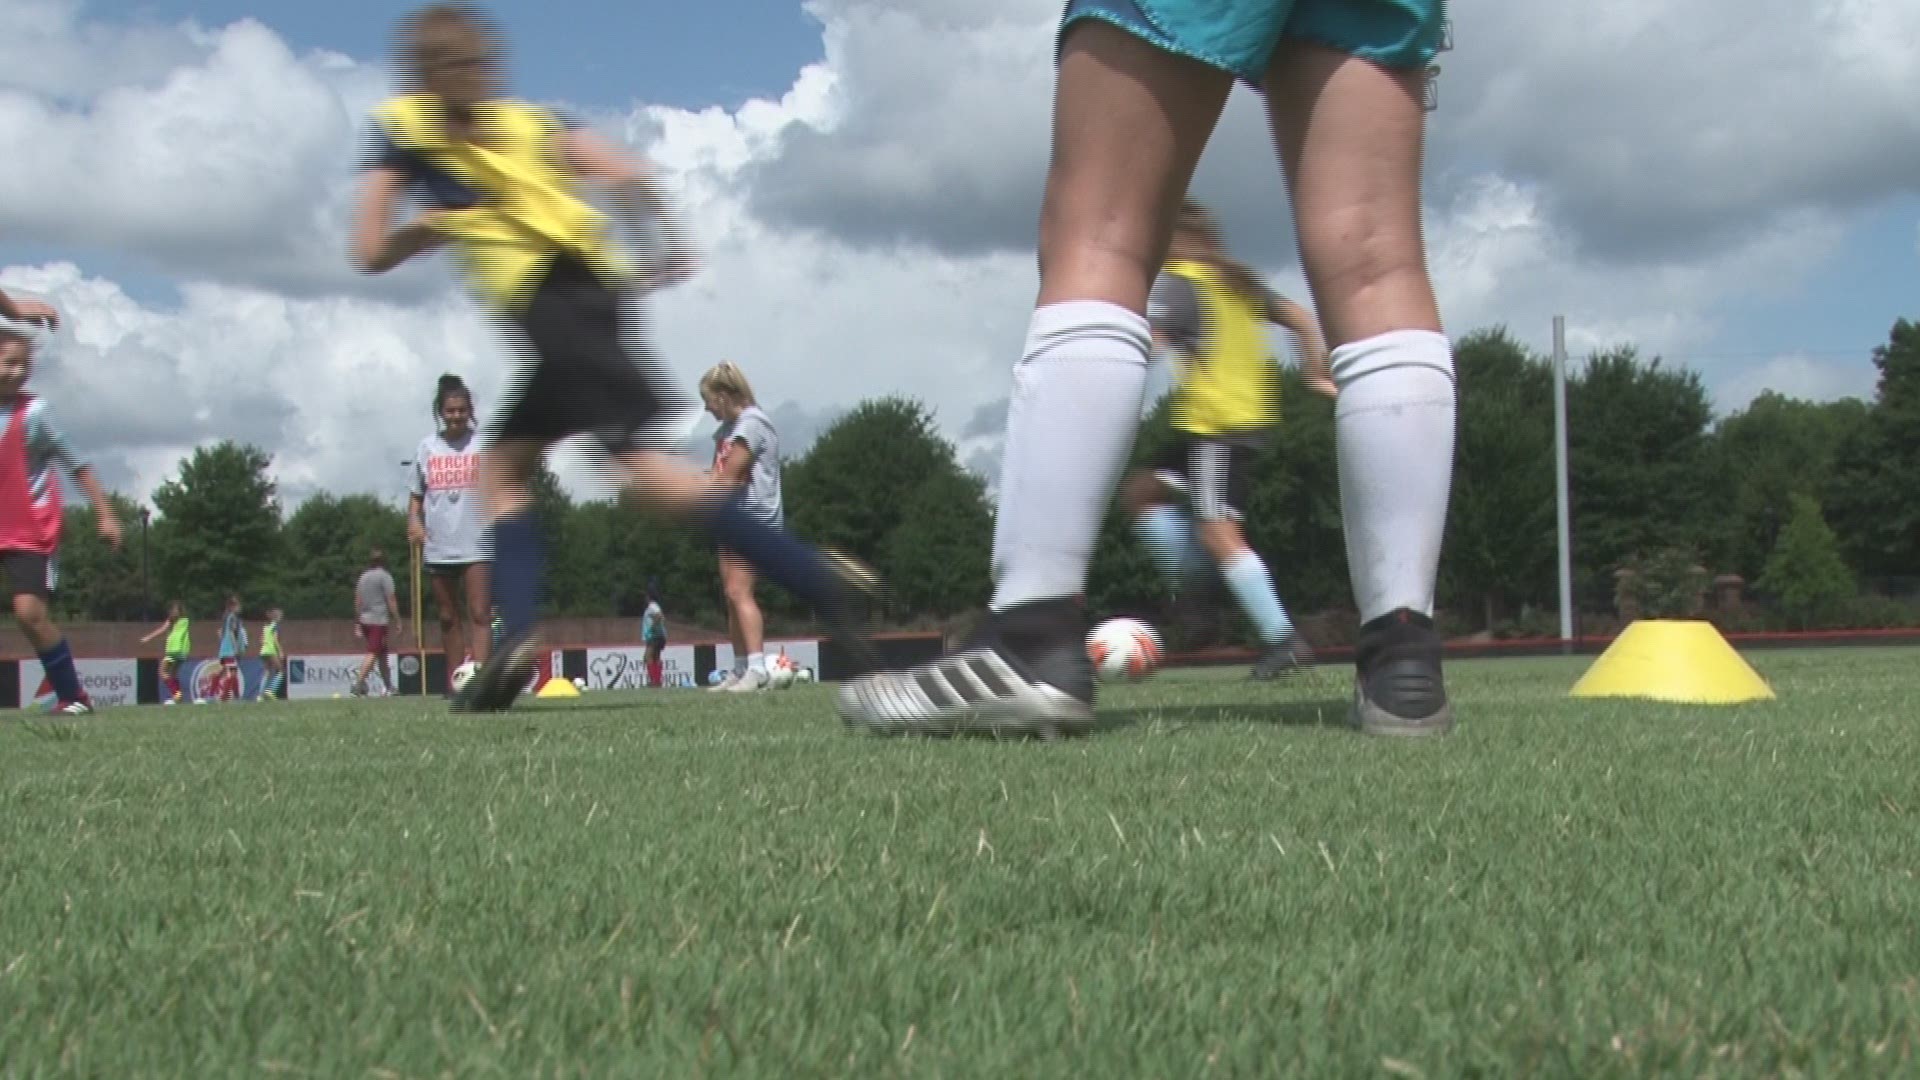 The United States Women's Soccer Team continues to pave the way for female athletes after their World Cup win. Here's how they're inspiring young players at Mercer's Elite Women's Soccer Camp back at home.